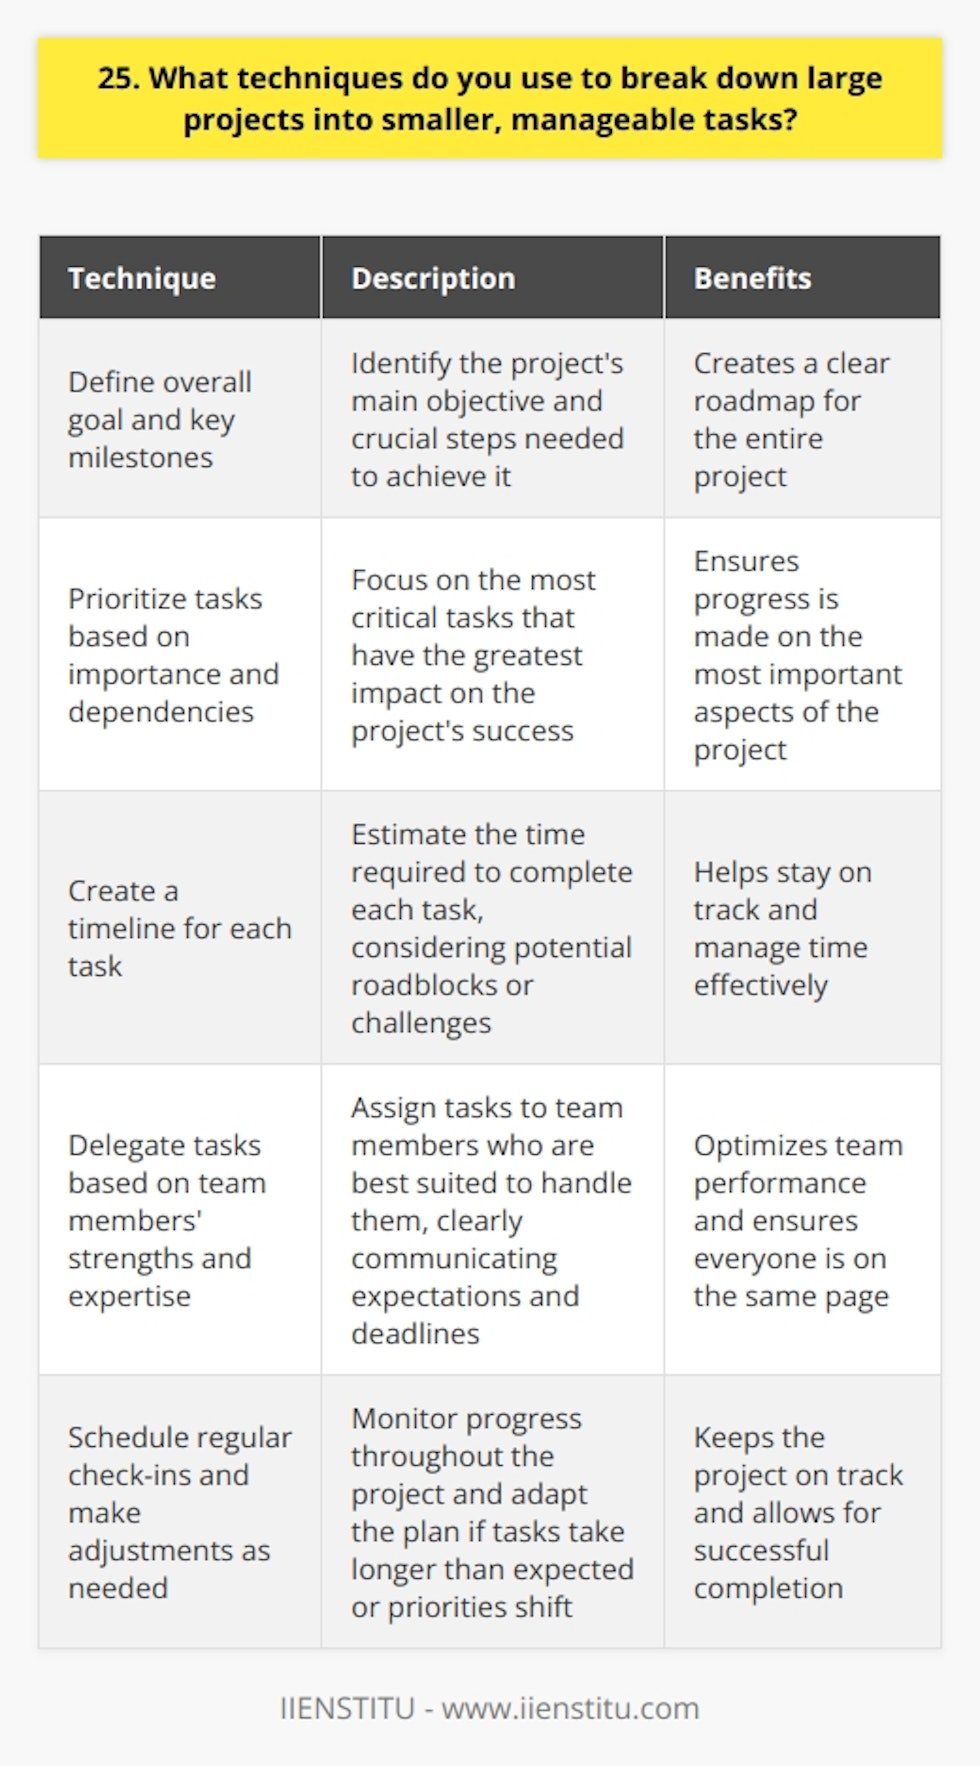 When tackling large projects, I employ several techniques to break them down into manageable tasks. First, I define the projects overall goal and identify the key milestones that need to be achieved. This helps me create a roadmap for the entire project. Prioritizing Tasks Next, I prioritize the tasks based on their importance and dependencies. I focus on the most critical tasks that have the biggest impact on the projects success. This ensures that Im making progress on the most important aspects of the project. Creating a Timeline I then create a timeline for each task, estimating the time required to complete it. I consider any potential roadblocks or challenges that may arise and factor them into the timeline. This helps me stay on track and manage my time effectively. Delegating Responsibilities If the project involves a team, I delegate tasks based on each members strengths and expertise. I clearly communicate the expectations and deadlines for each task to ensure everyone is on the same page. Regular Check-Ins and Adjustments Throughout the project, I schedule regular check-ins to monitor progress and make any necessary adjustments. If a task is taking longer than expected or if priorities shift, I adapt the plan accordingly. I find that breaking down large projects into smaller tasks helps me stay organized and focused. It allows me to tackle the project one step at a time, making it feel less overwhelming. By regularly reviewing progress and making adjustments as needed, I can ensure that the project stays on track and is completed successfully.